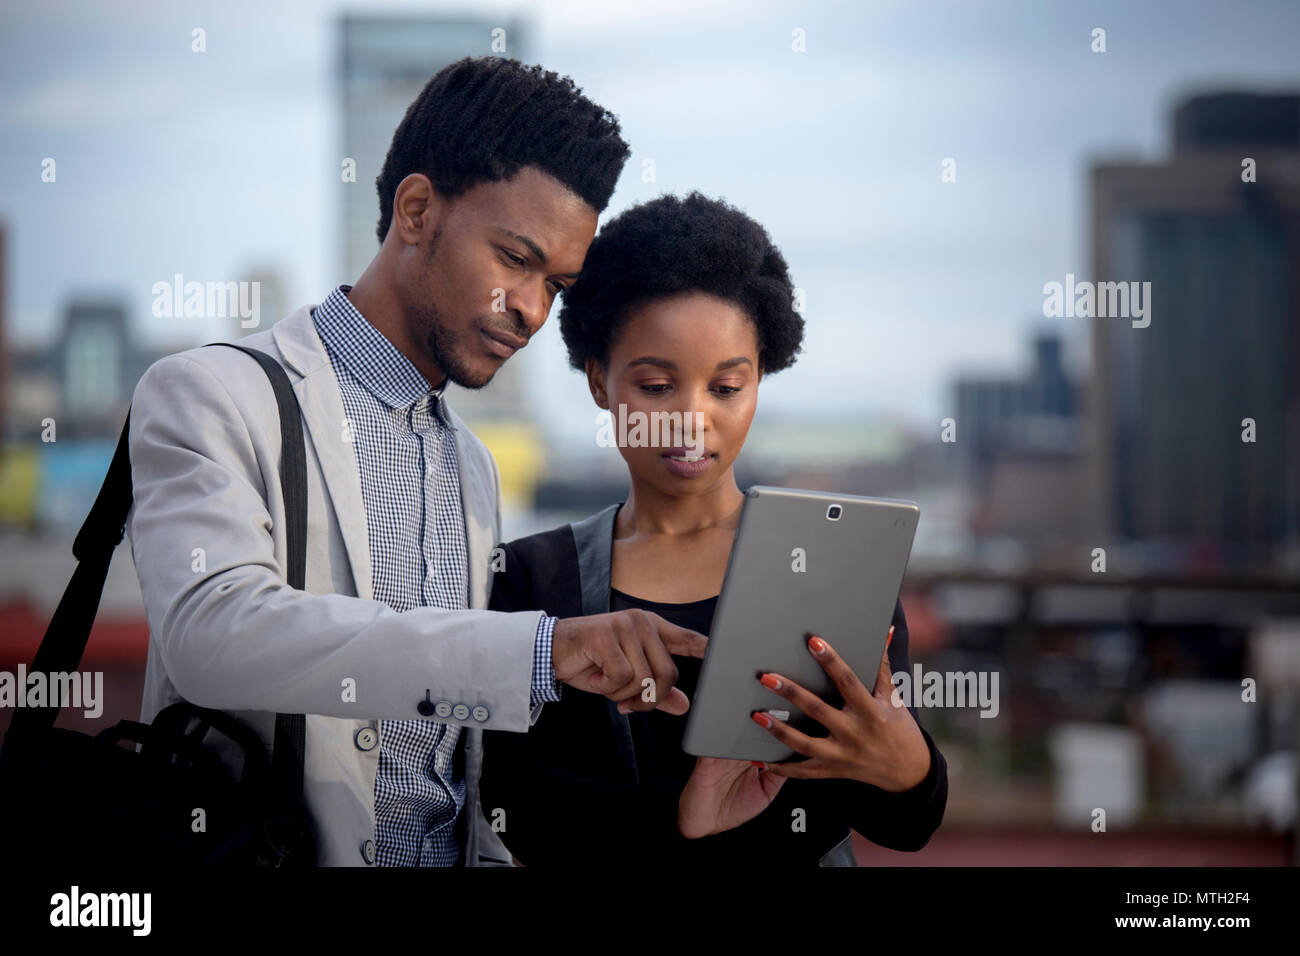 Business man and woman looking at tablet Banque D'Images